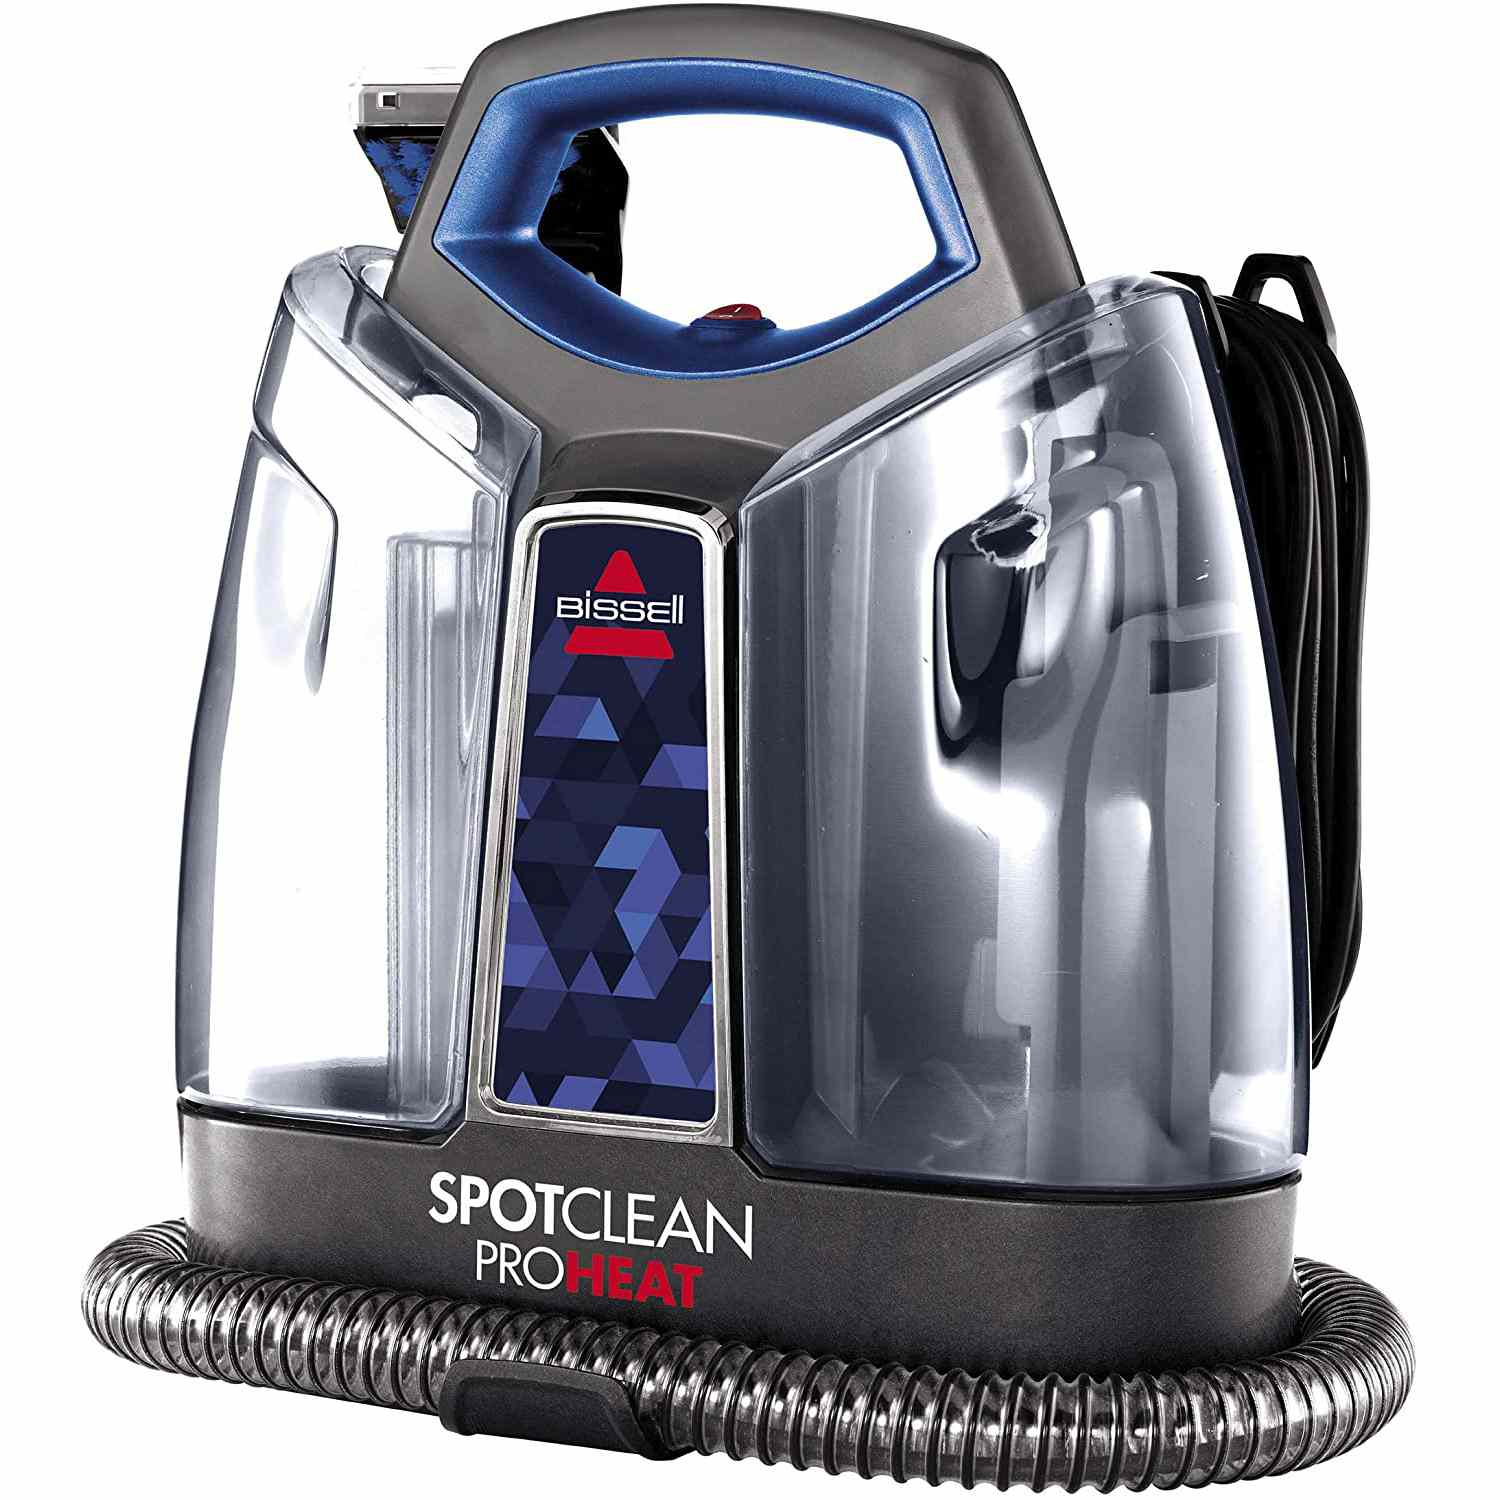 Compact Carpet Cleaner